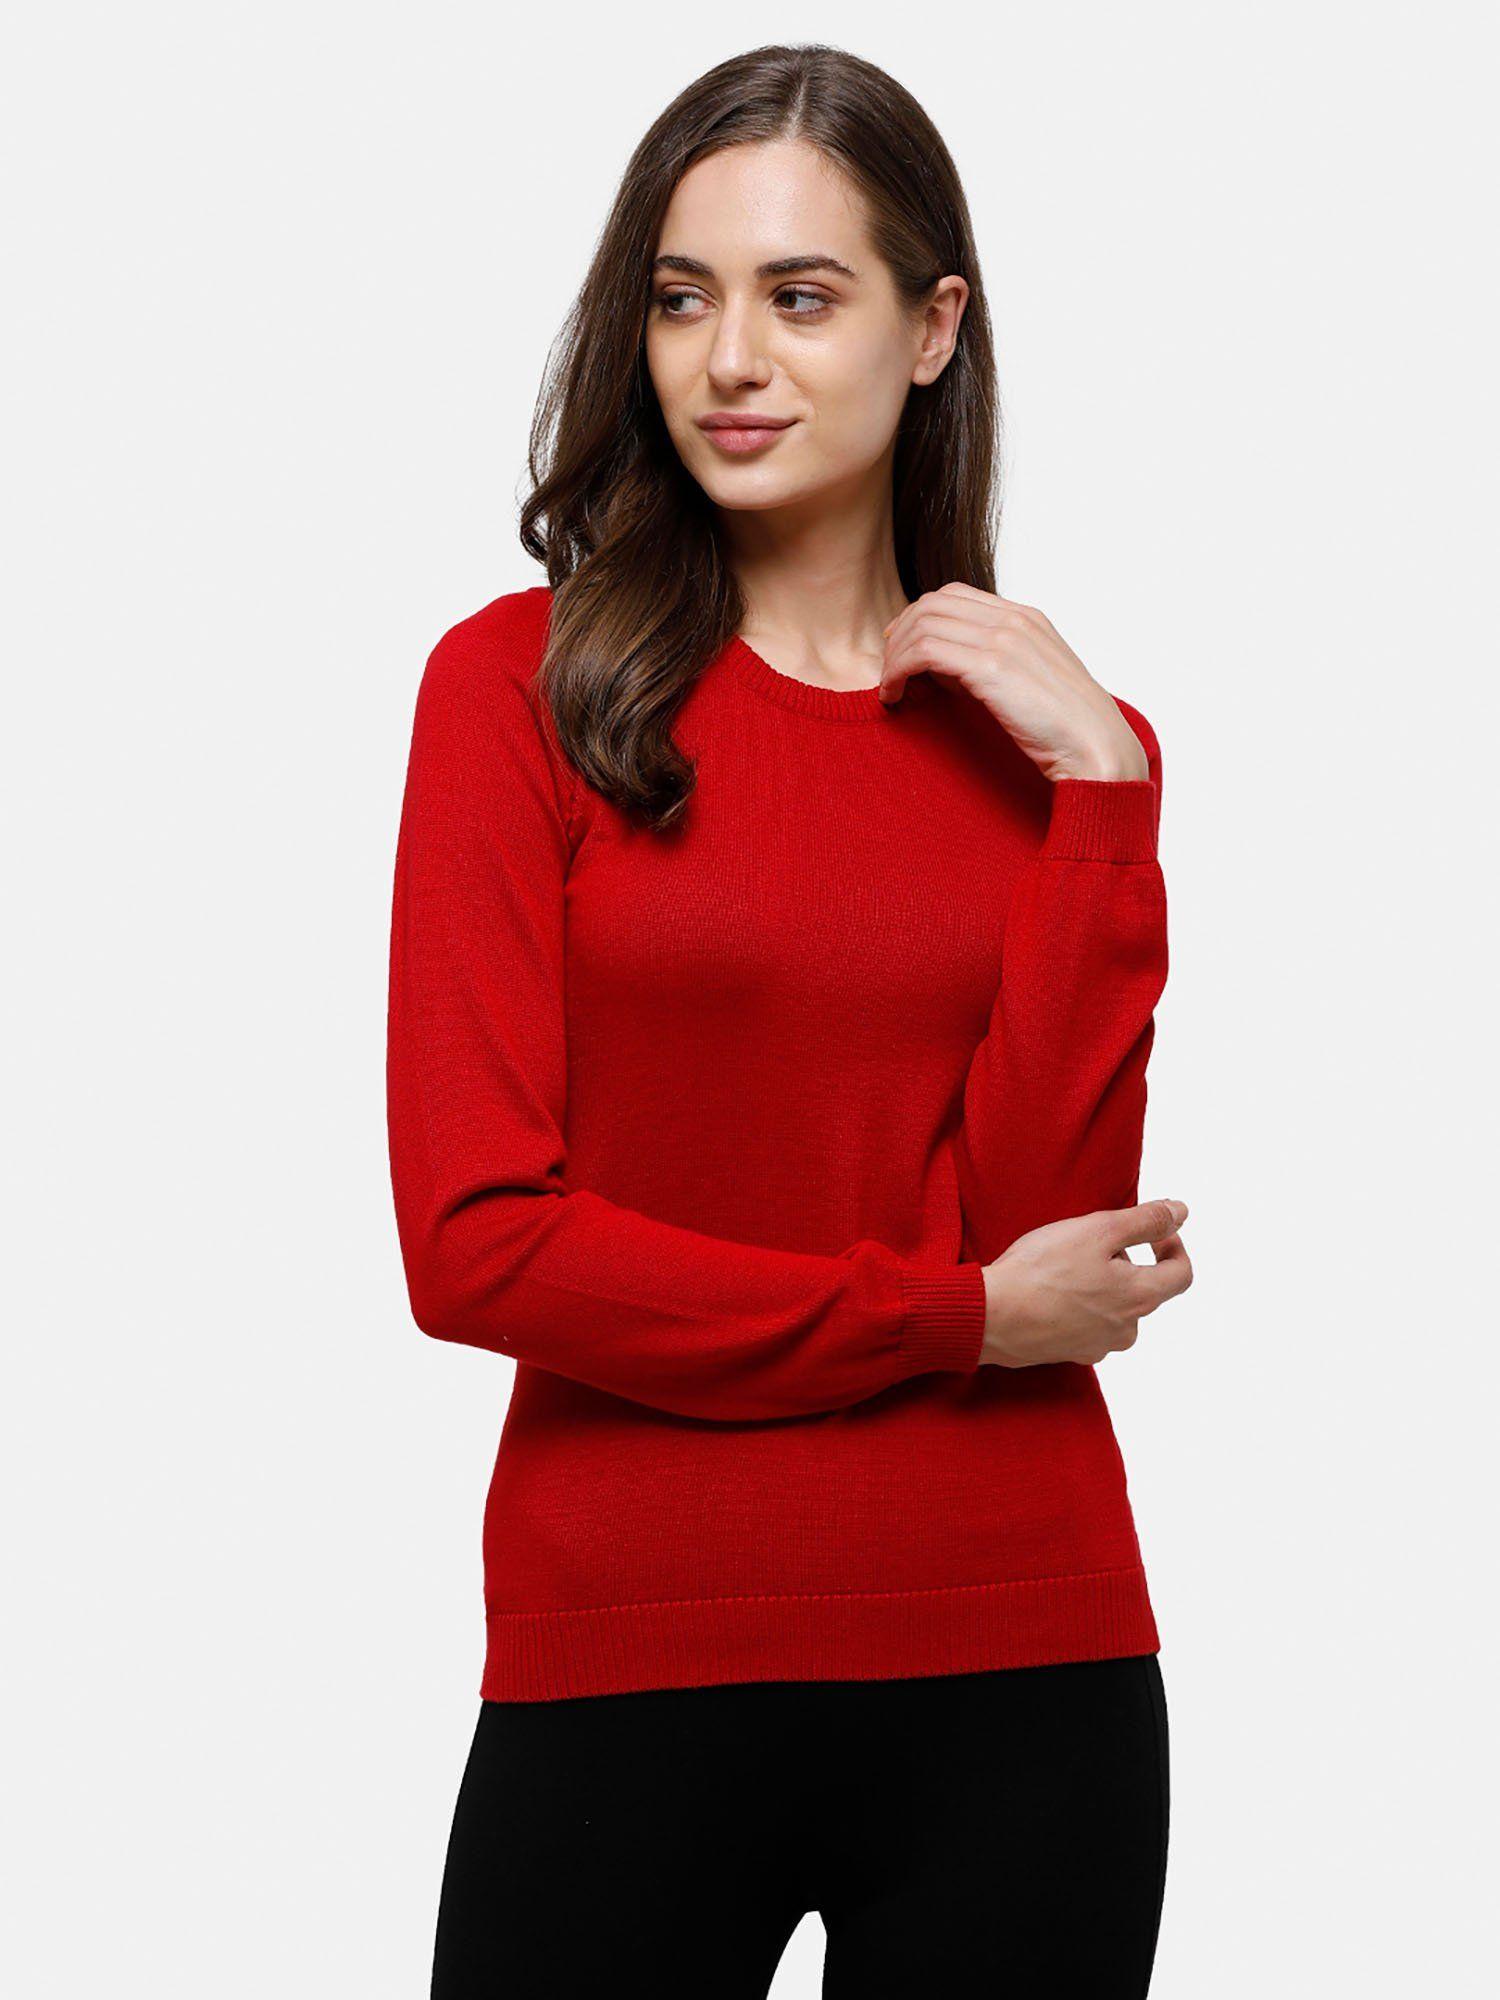 98 degree north's red full sleeves sweater